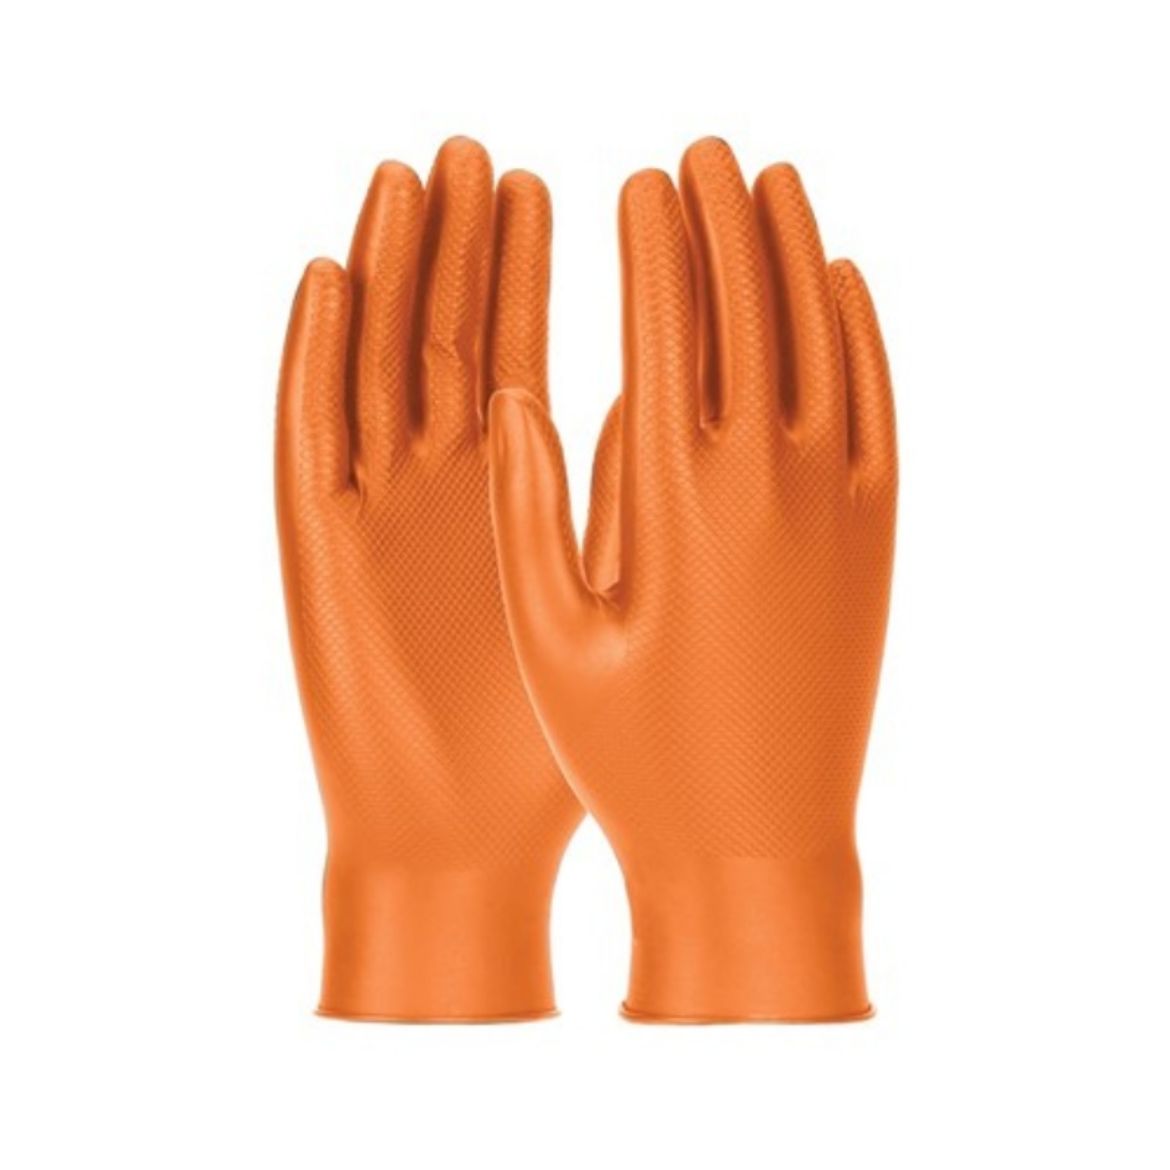 Picture of GRIPPAZ NON-SLIP ORANGE DISPOSABLE NITRILE GLOVES. AVAILABLE IN SIZES S/M/L/XL/2XL